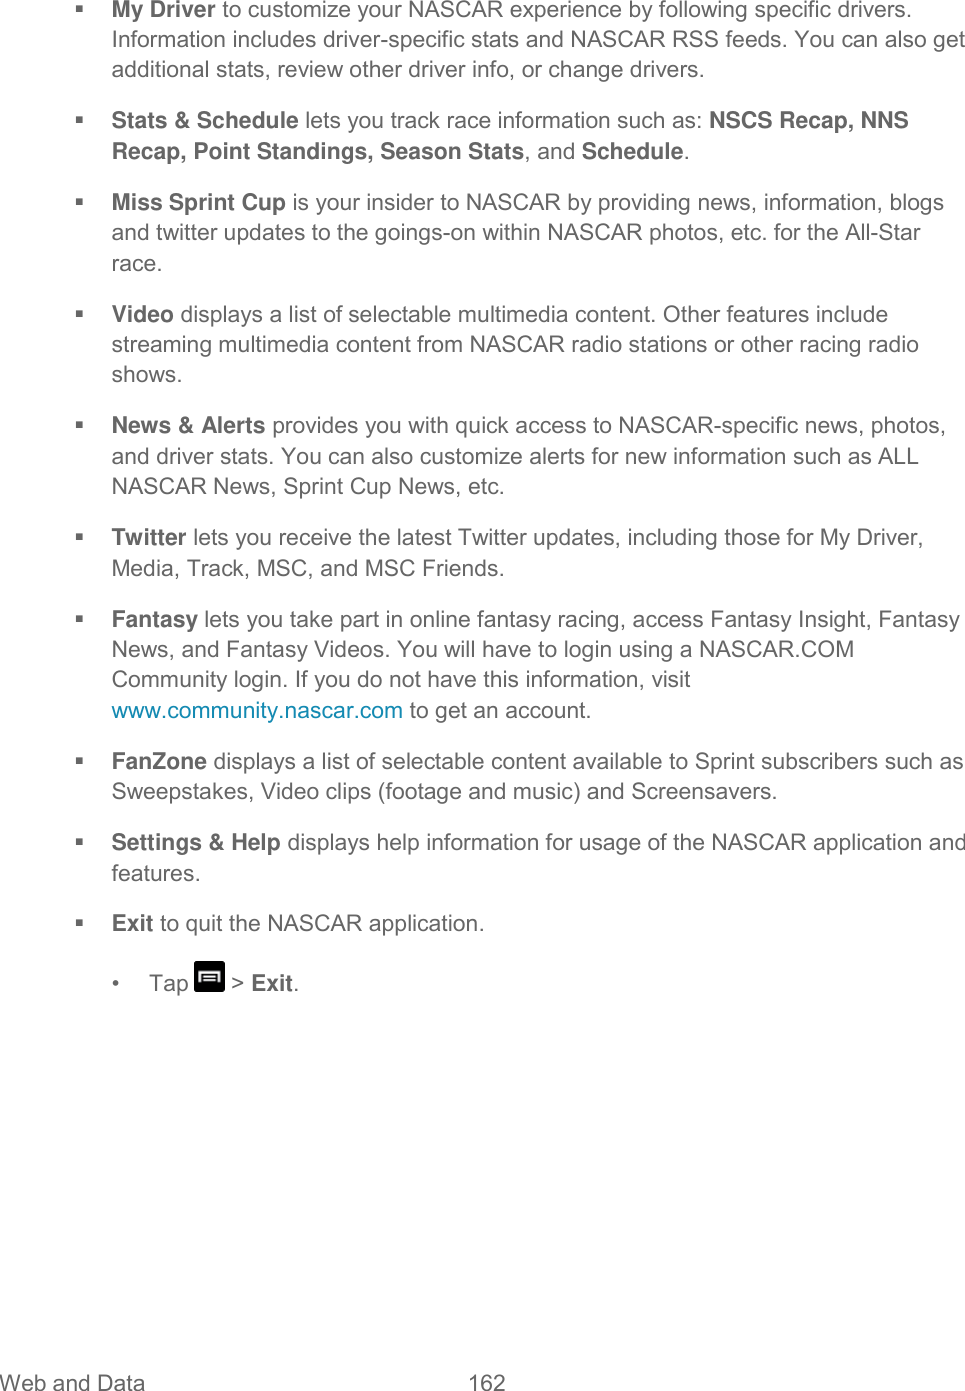 Web and Data  162    My Driver to customize your NASCAR experience by following specific drivers. Information includes driver-specific stats and NASCAR RSS feeds. You can also get additional stats, review other driver info, or change drivers.  Stats &amp; Schedule lets you track race information such as: NSCS Recap, NNS Recap, Point Standings, Season Stats, and Schedule.  Miss Sprint Cup is your insider to NASCAR by providing news, information, blogs and twitter updates to the goings-on within NASCAR photos, etc. for the All-Star race.  Video displays a list of selectable multimedia content. Other features include streaming multimedia content from NASCAR radio stations or other racing radio shows.  News &amp; Alerts provides you with quick access to NASCAR-specific news, photos, and driver stats. You can also customize alerts for new information such as ALL NASCAR News, Sprint Cup News, etc.  Twitter lets you receive the latest Twitter updates, including those for My Driver, Media, Track, MSC, and MSC Friends.  Fantasy lets you take part in online fantasy racing, access Fantasy Insight, Fantasy News, and Fantasy Videos. You will have to login using a NASCAR.COM Community login. If you do not have this information, visit www.community.nascar.com to get an account.   FanZone displays a list of selectable content available to Sprint subscribers such as Sweepstakes, Video clips (footage and music) and Screensavers.  Settings &amp; Help displays help information for usage of the NASCAR application and features.  Exit to quit the NASCAR application.  •  Tap   &gt; Exit. 